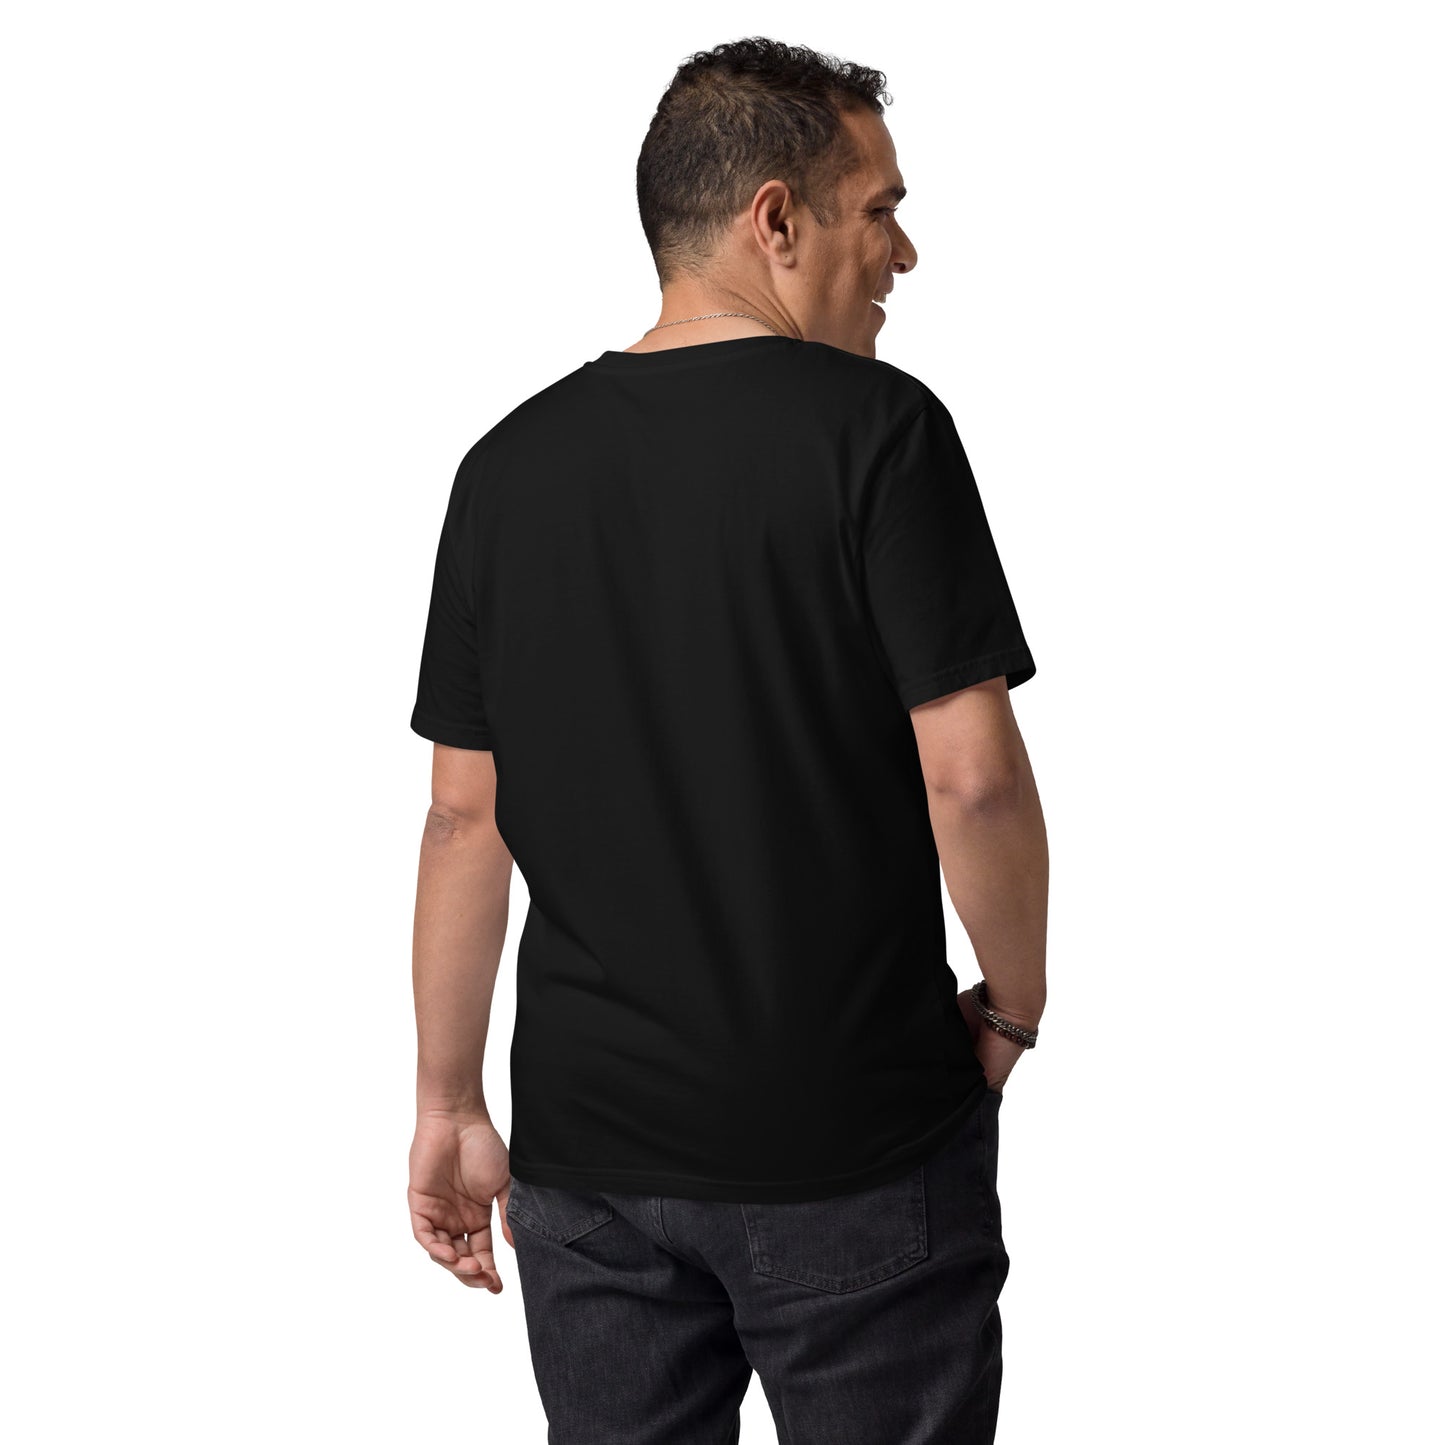 to-the-moon-t-shirt-black-back